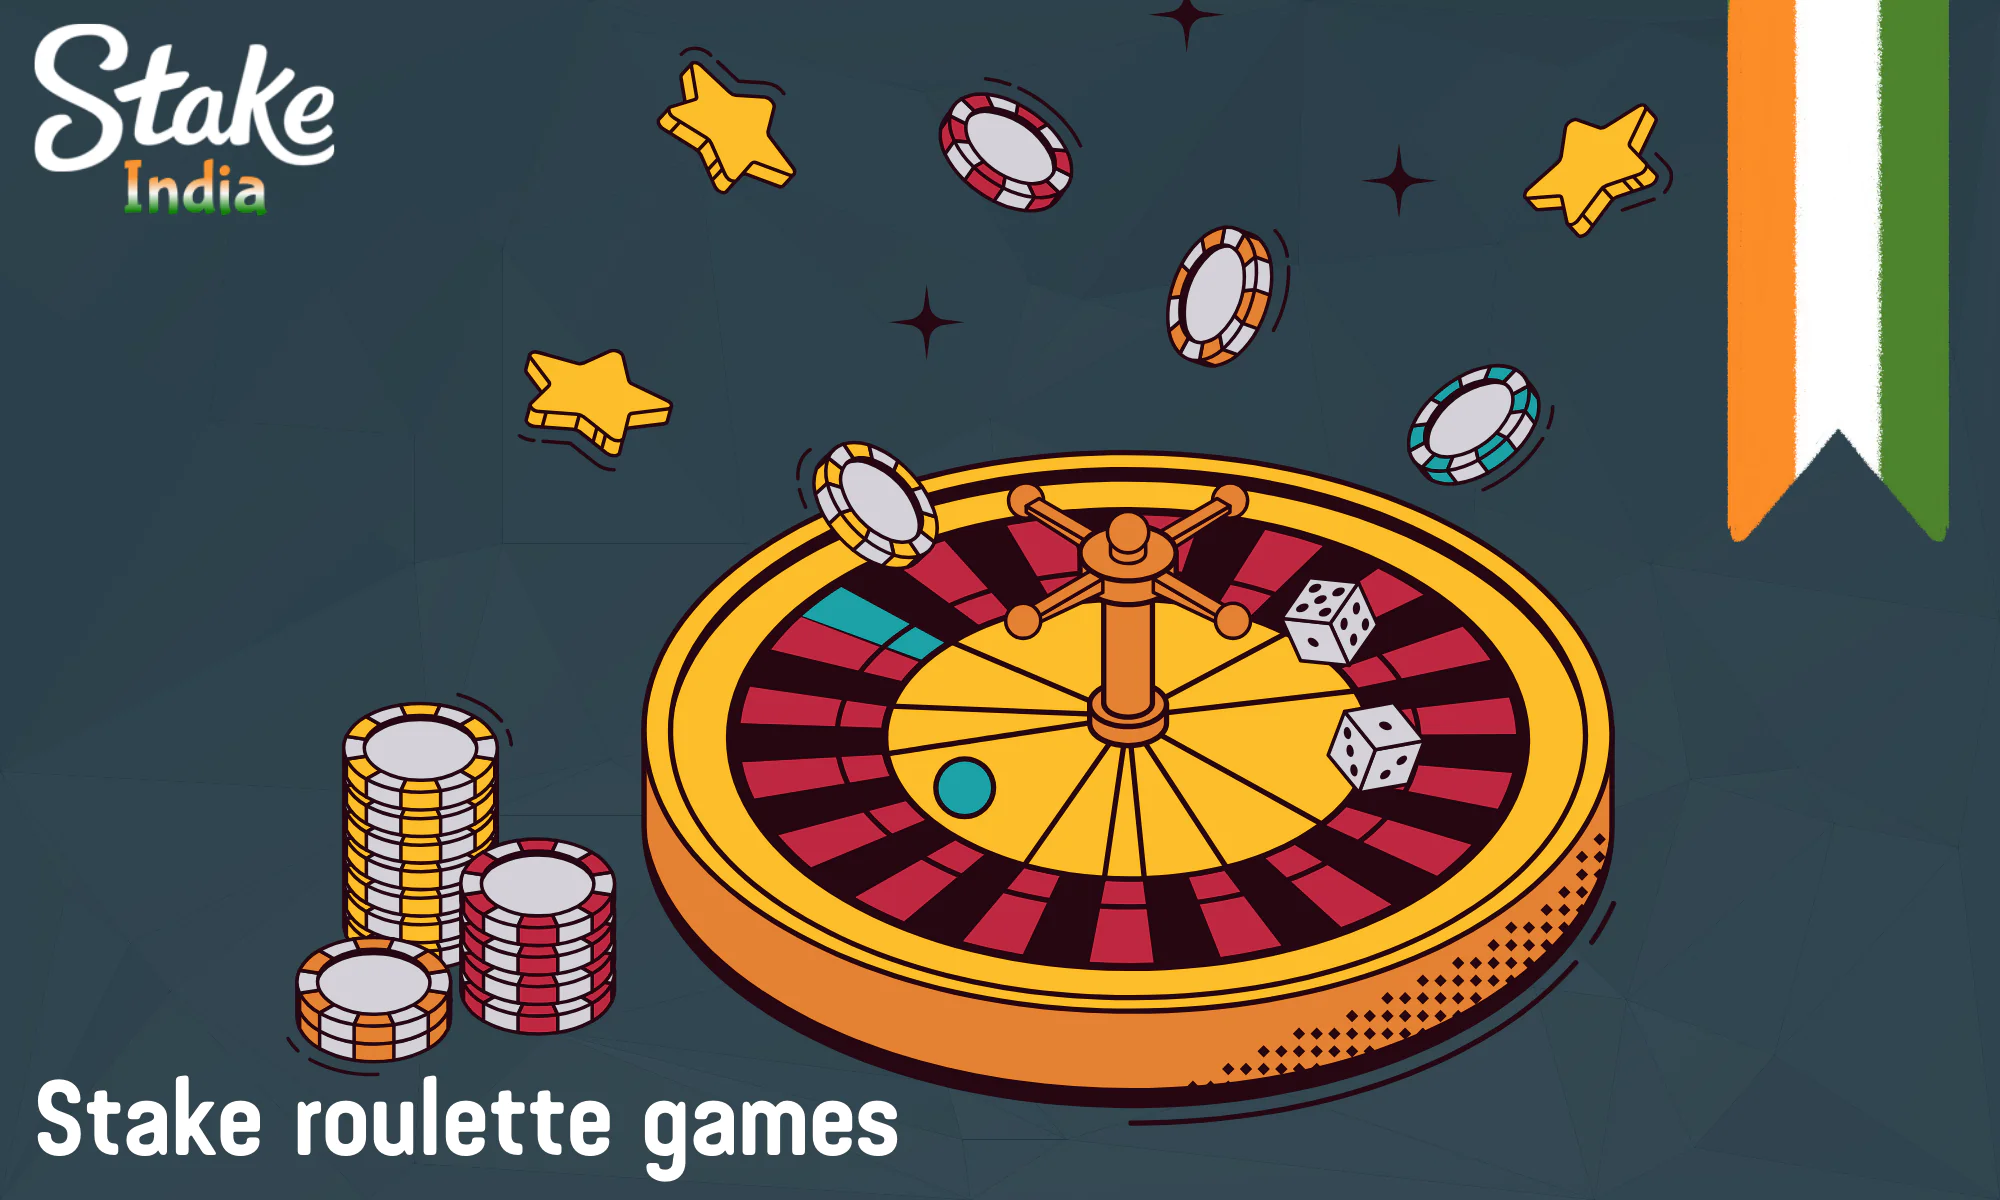 The collection of Stake roulette games exceeds 10 titles in the category